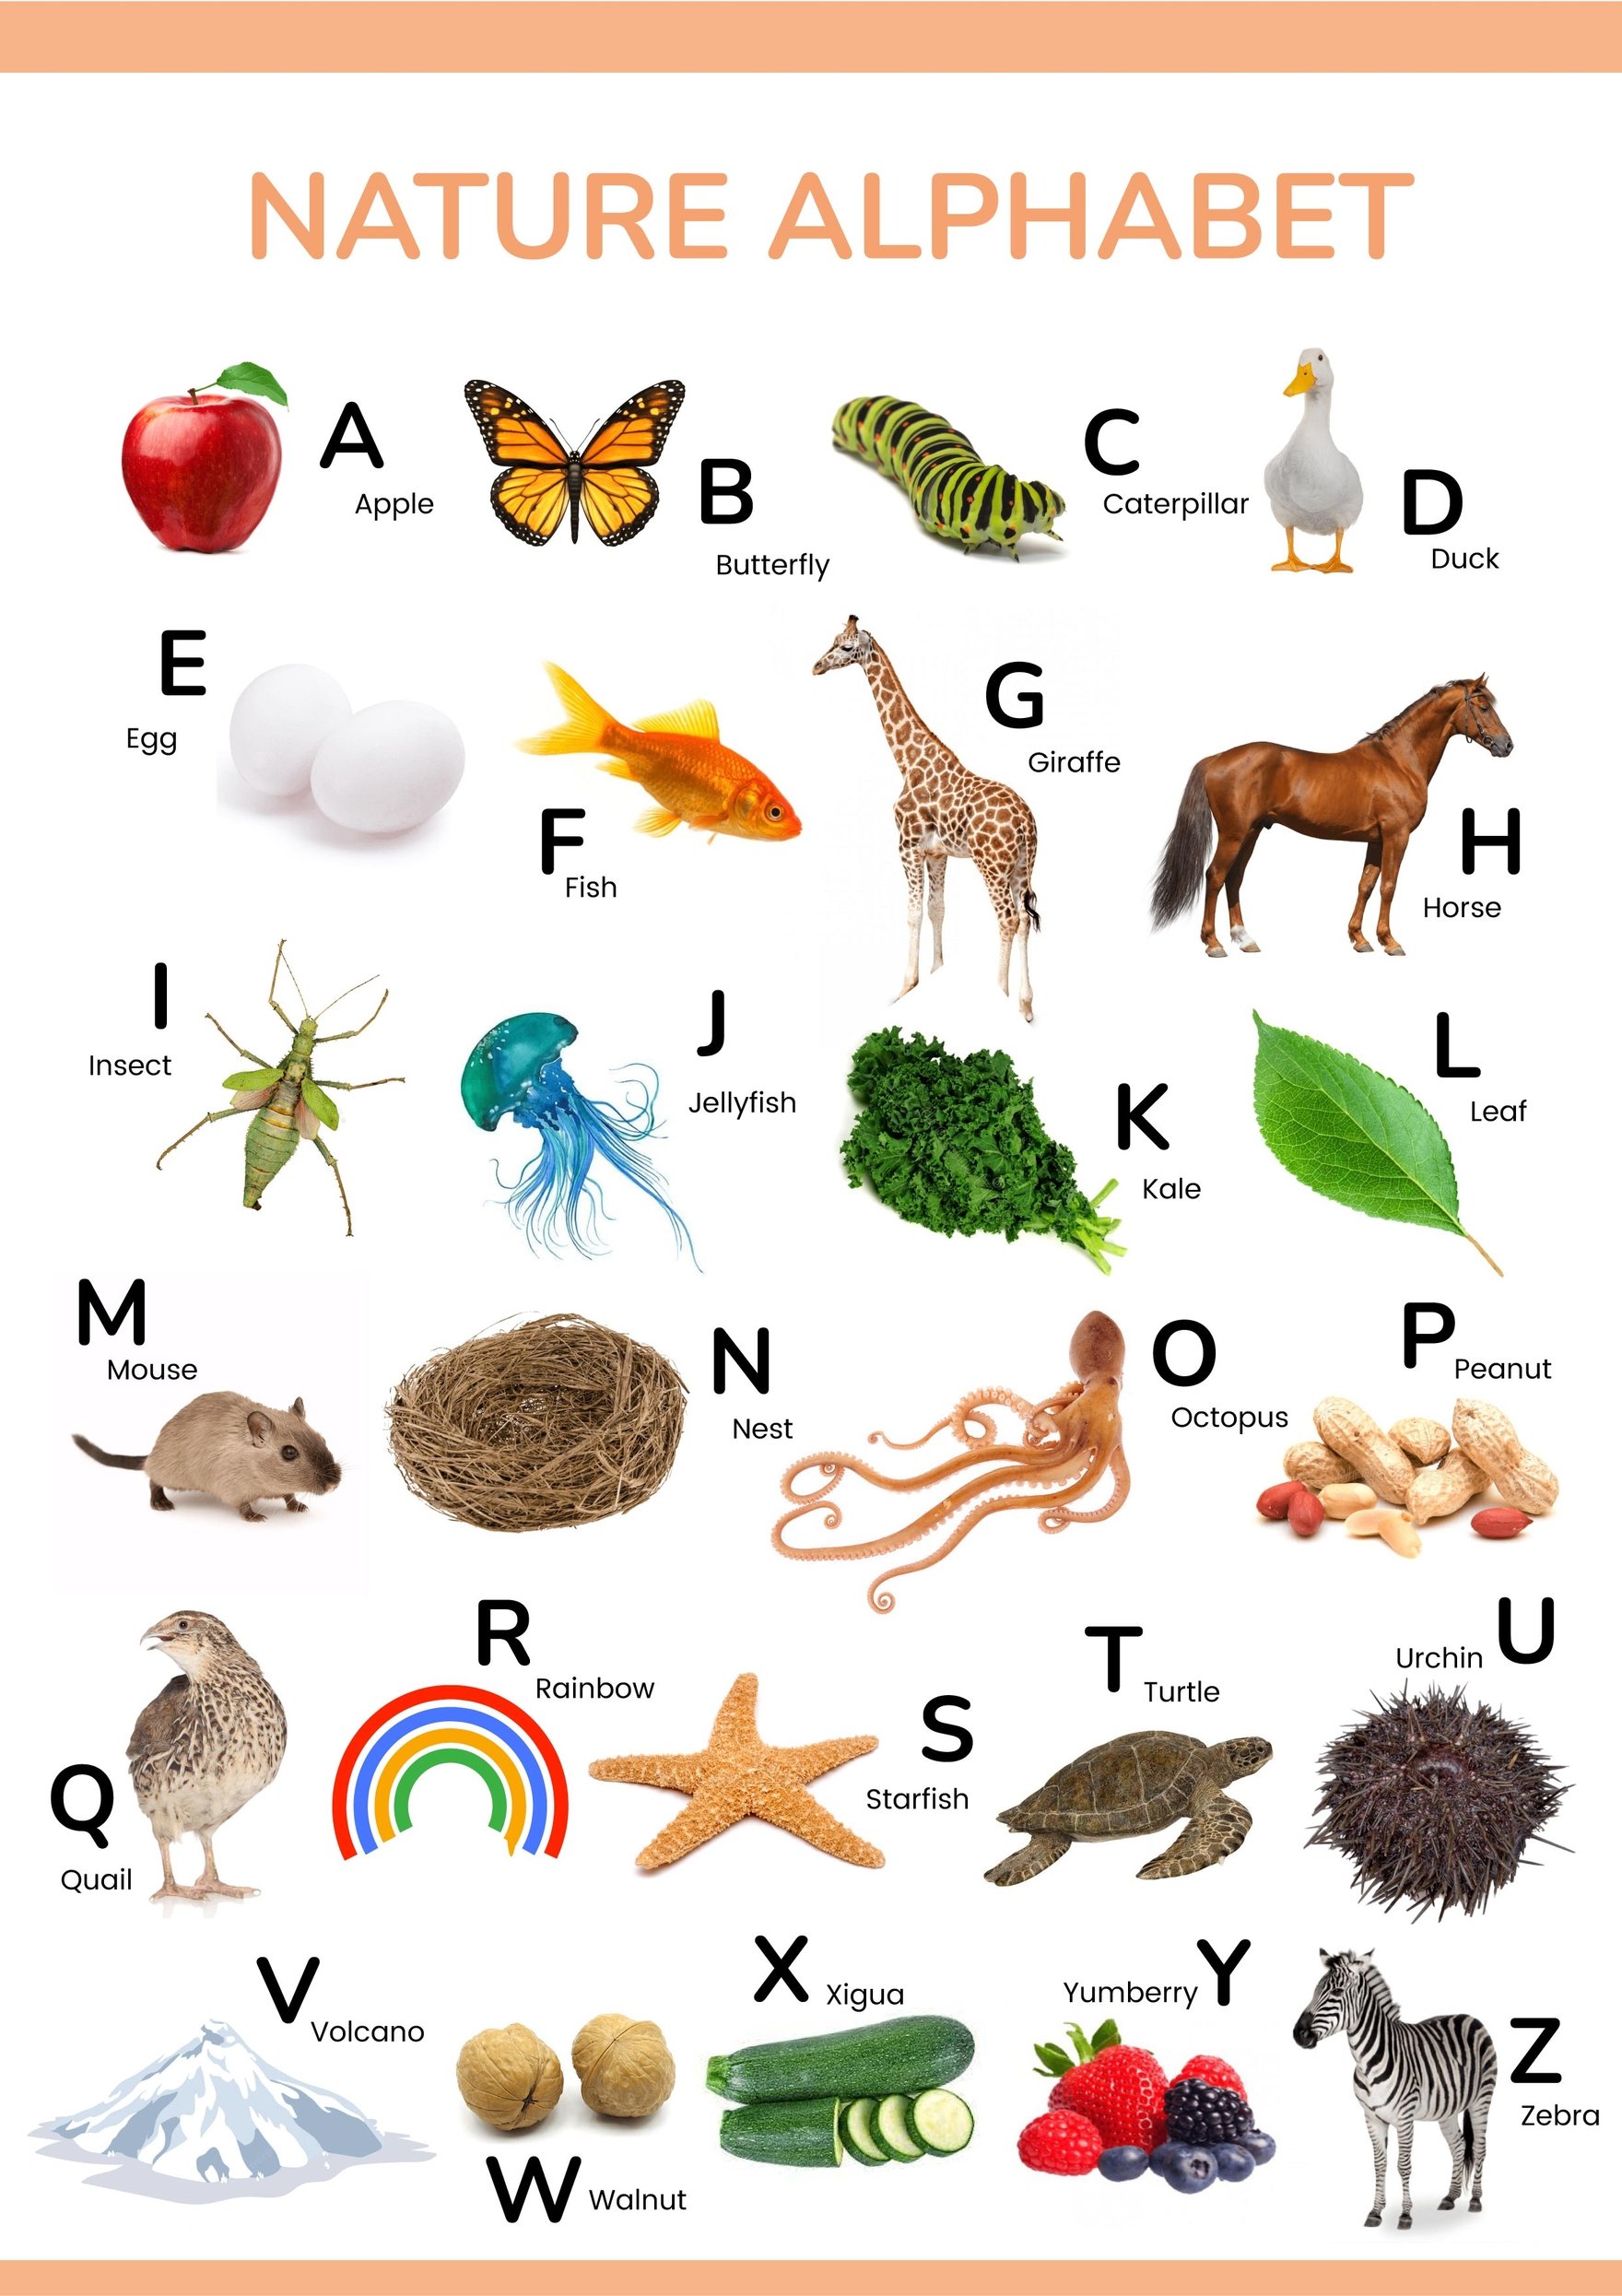 free-nature-alphabet-chart-download-in-pdf-illustrator-template